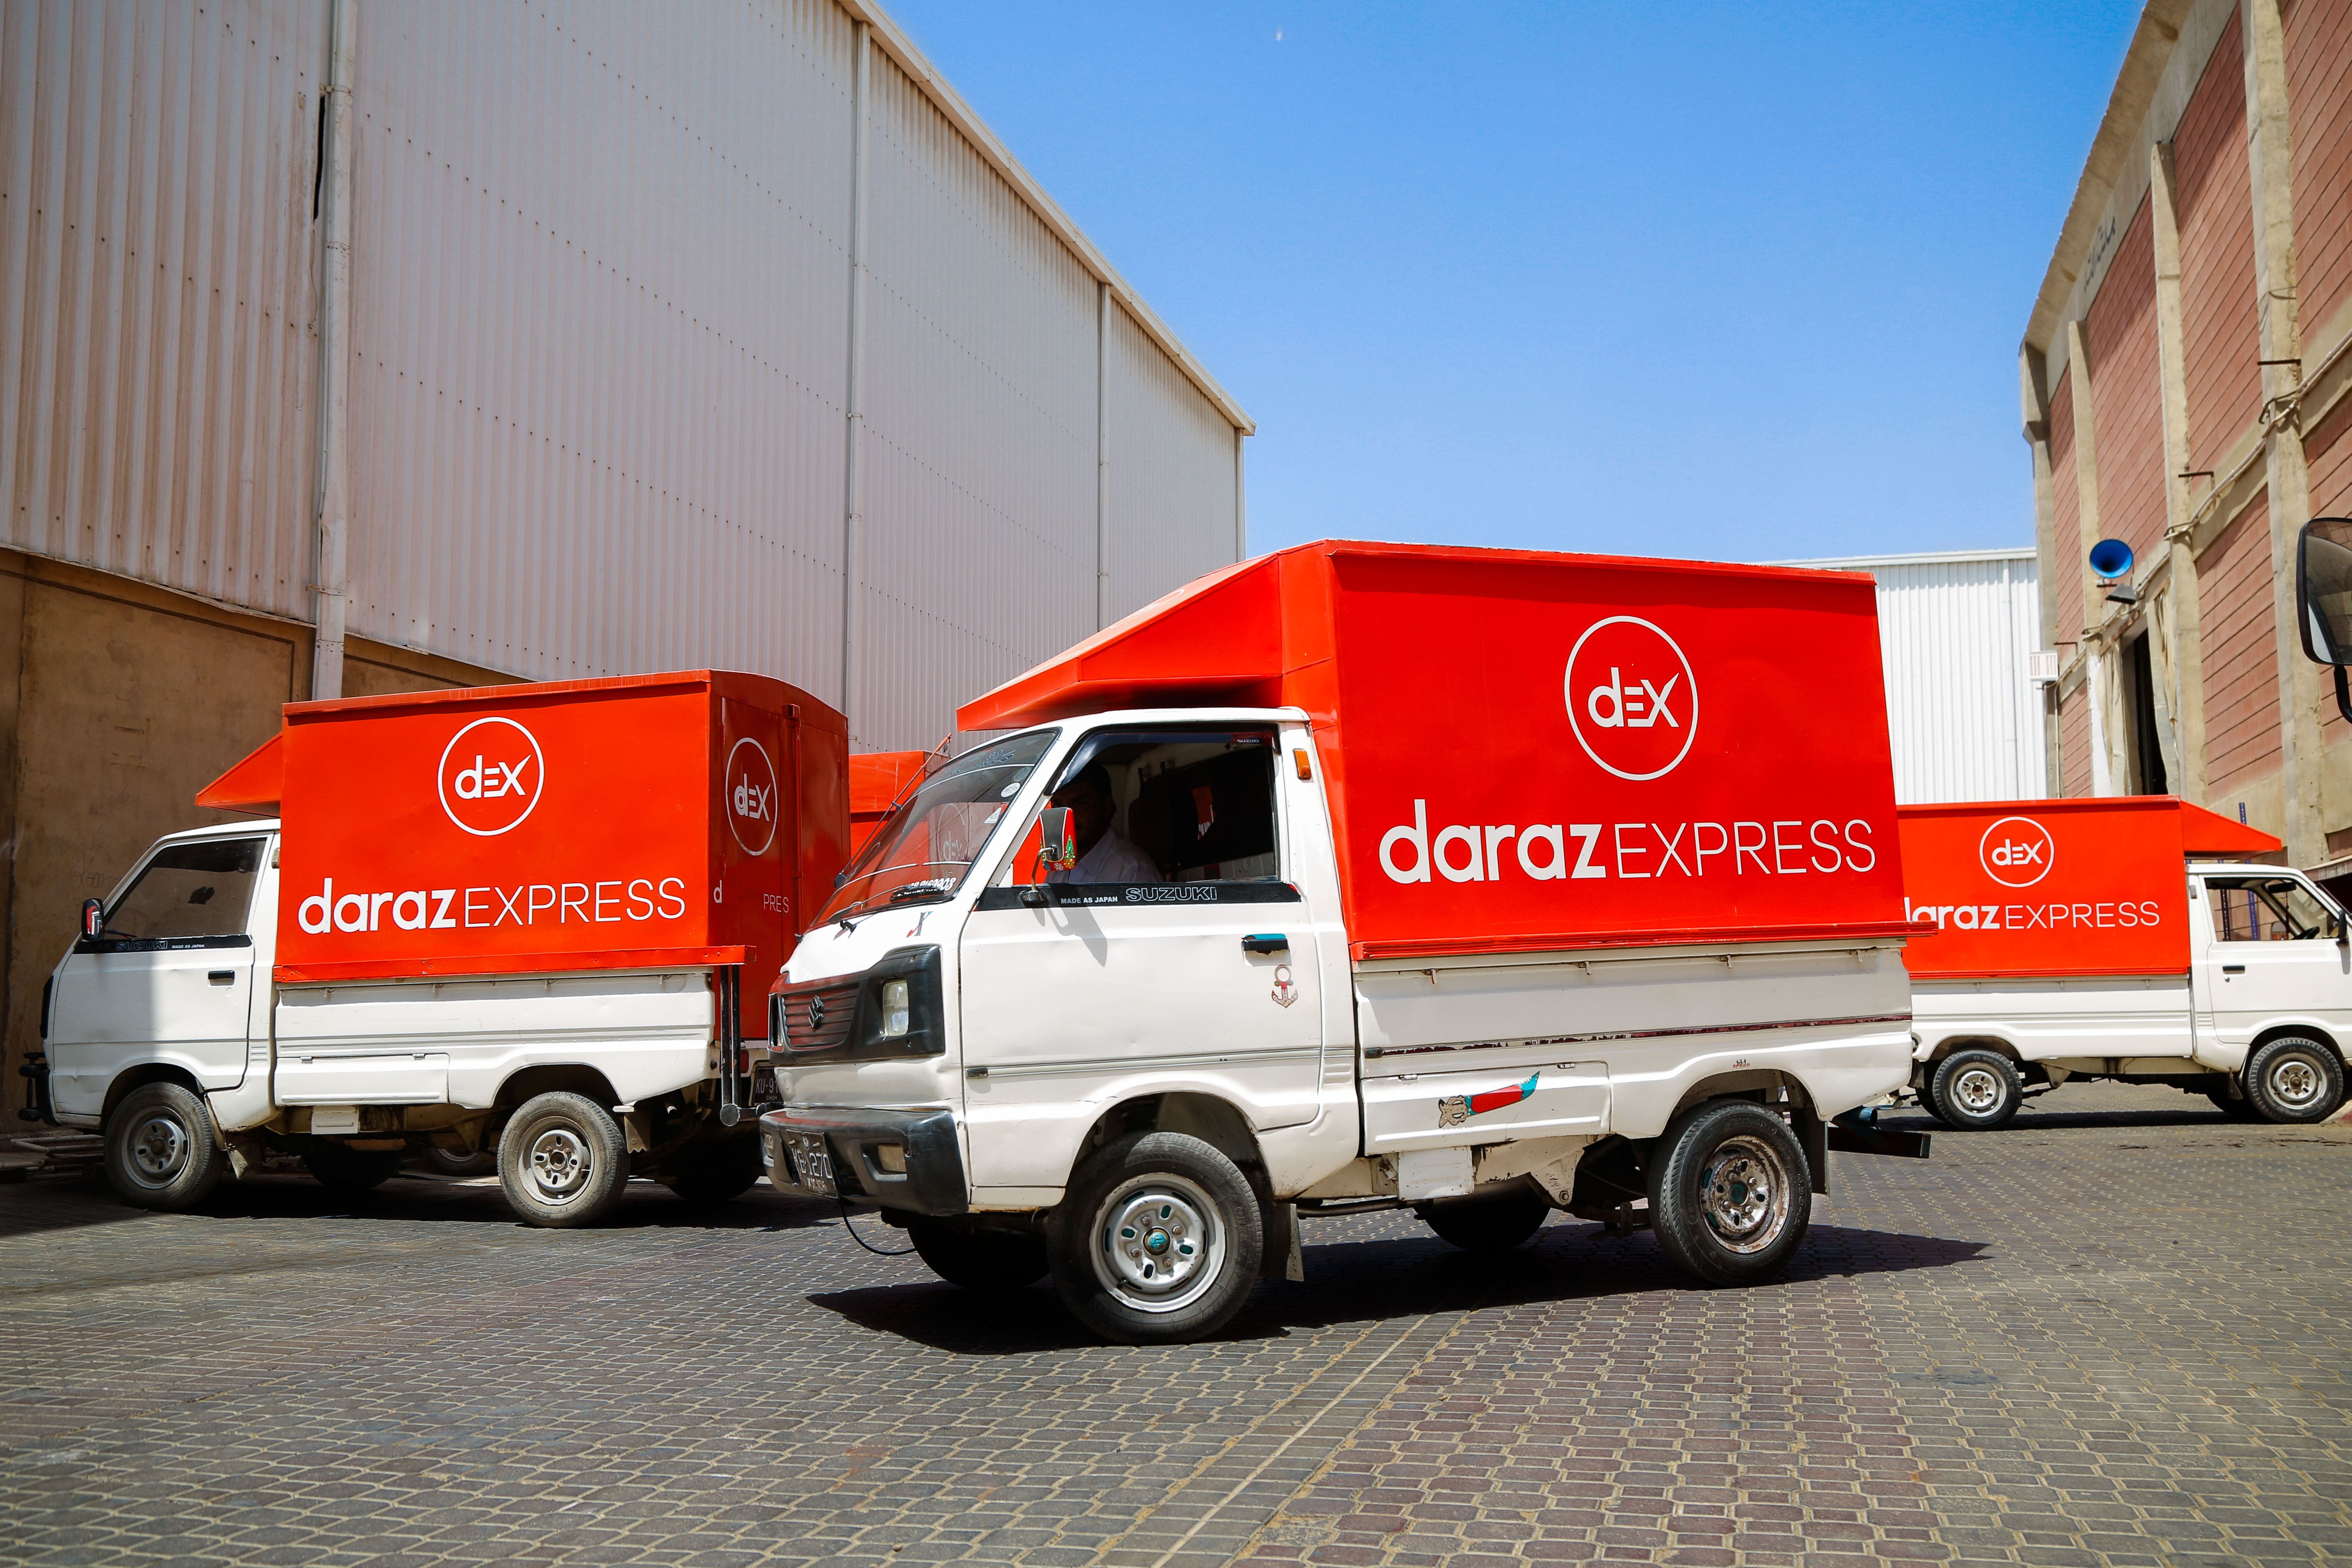 Daraz express delivery